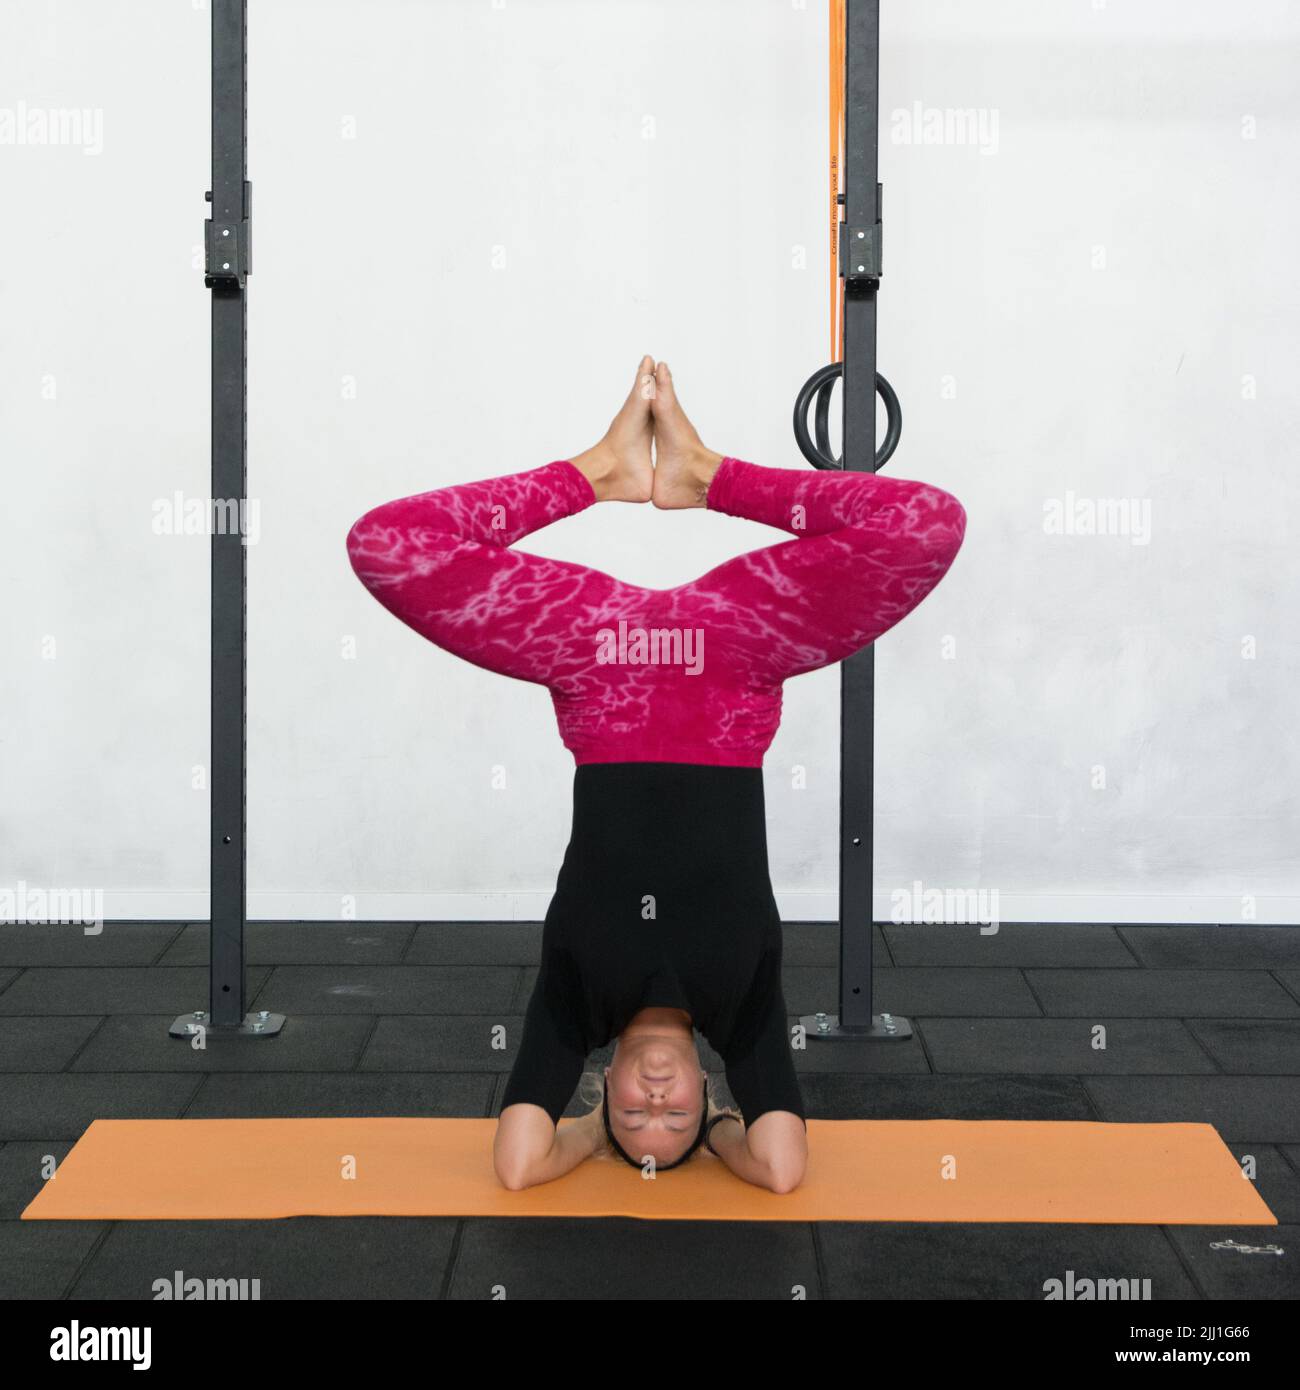 Blonde youth woman performing headstand with knees bent and foot together yoga pose wearing pink yoga leggings and black shirt in a gym. Stock Photo